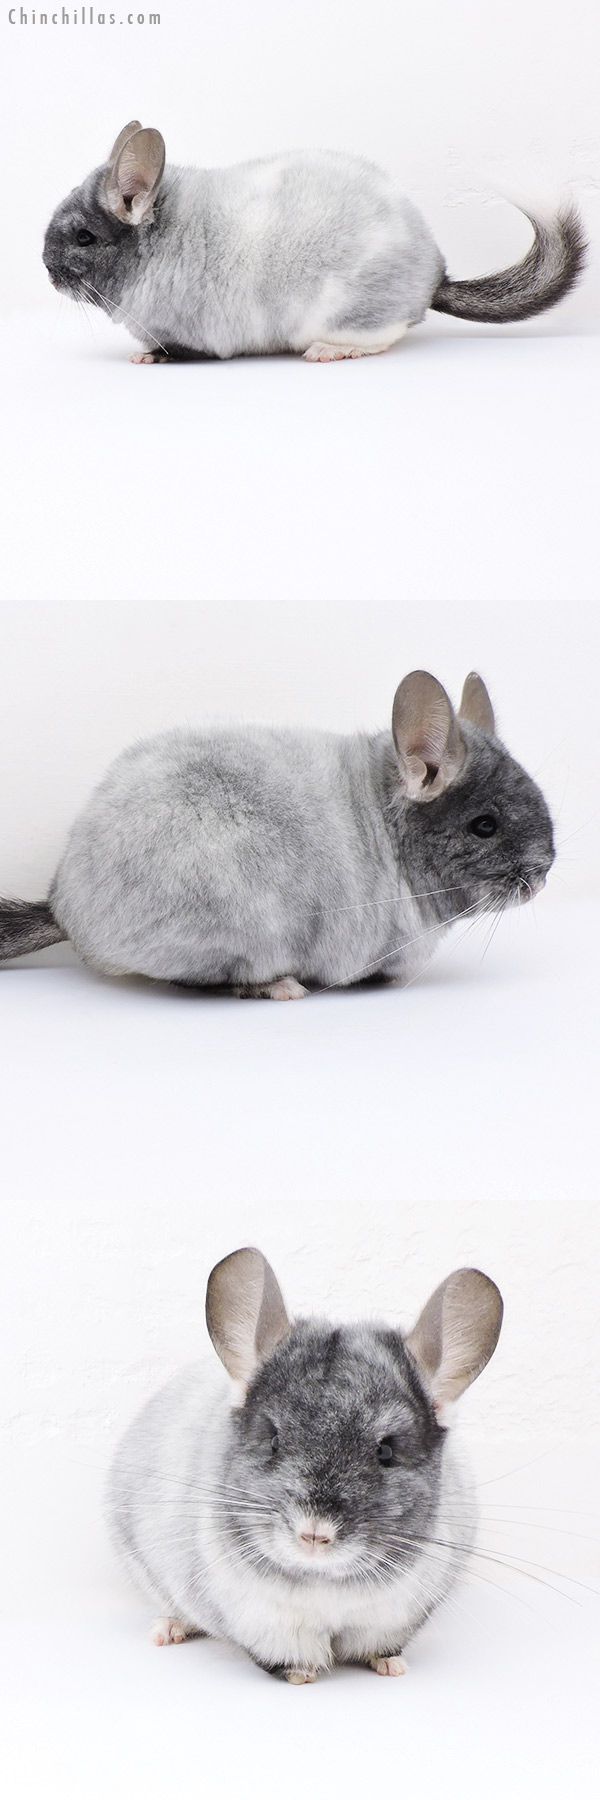 Chinchilla or related item offered for sale or export on Chinchillas.com - 18306 Brevi Type Show Quality Unique Ebony & White Mosaic Female Chinchilla